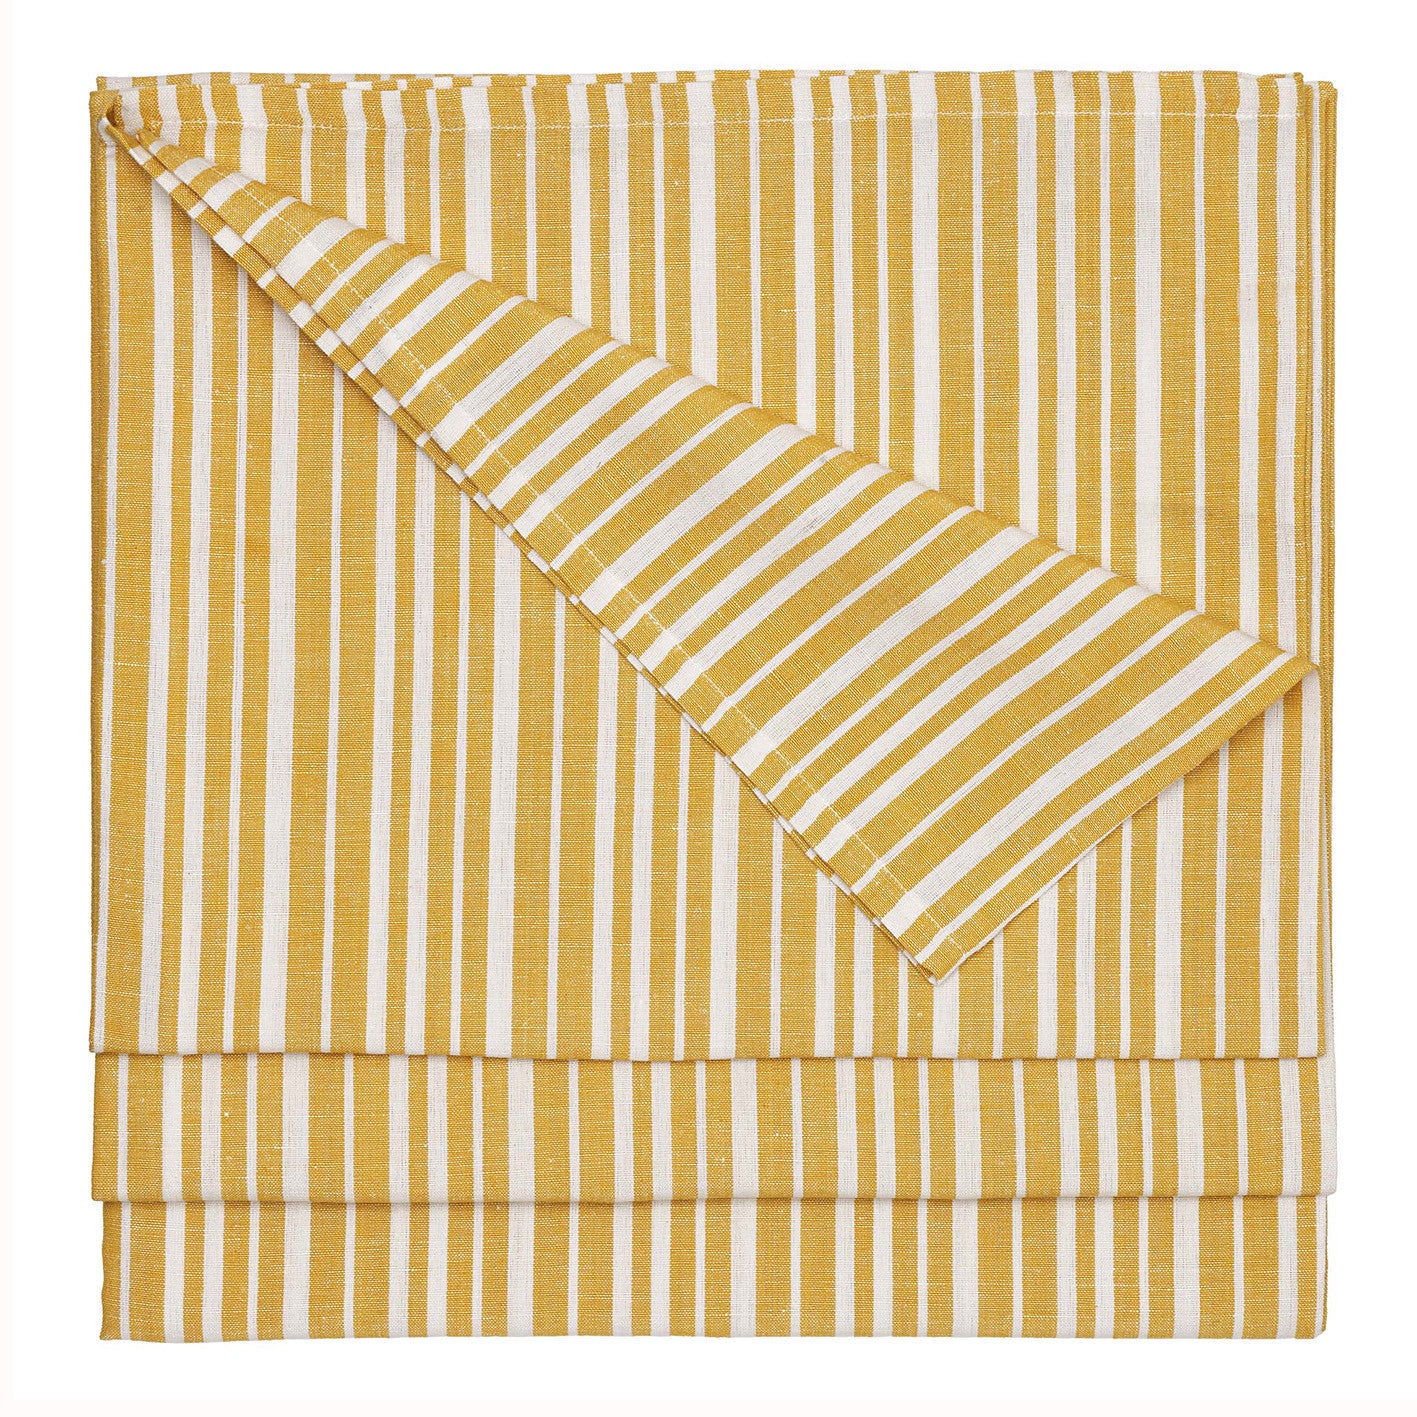 Palermo Ticking Stripe Cotton Linen Tablecloth in Mustard Gold Ships from Canada (USA)